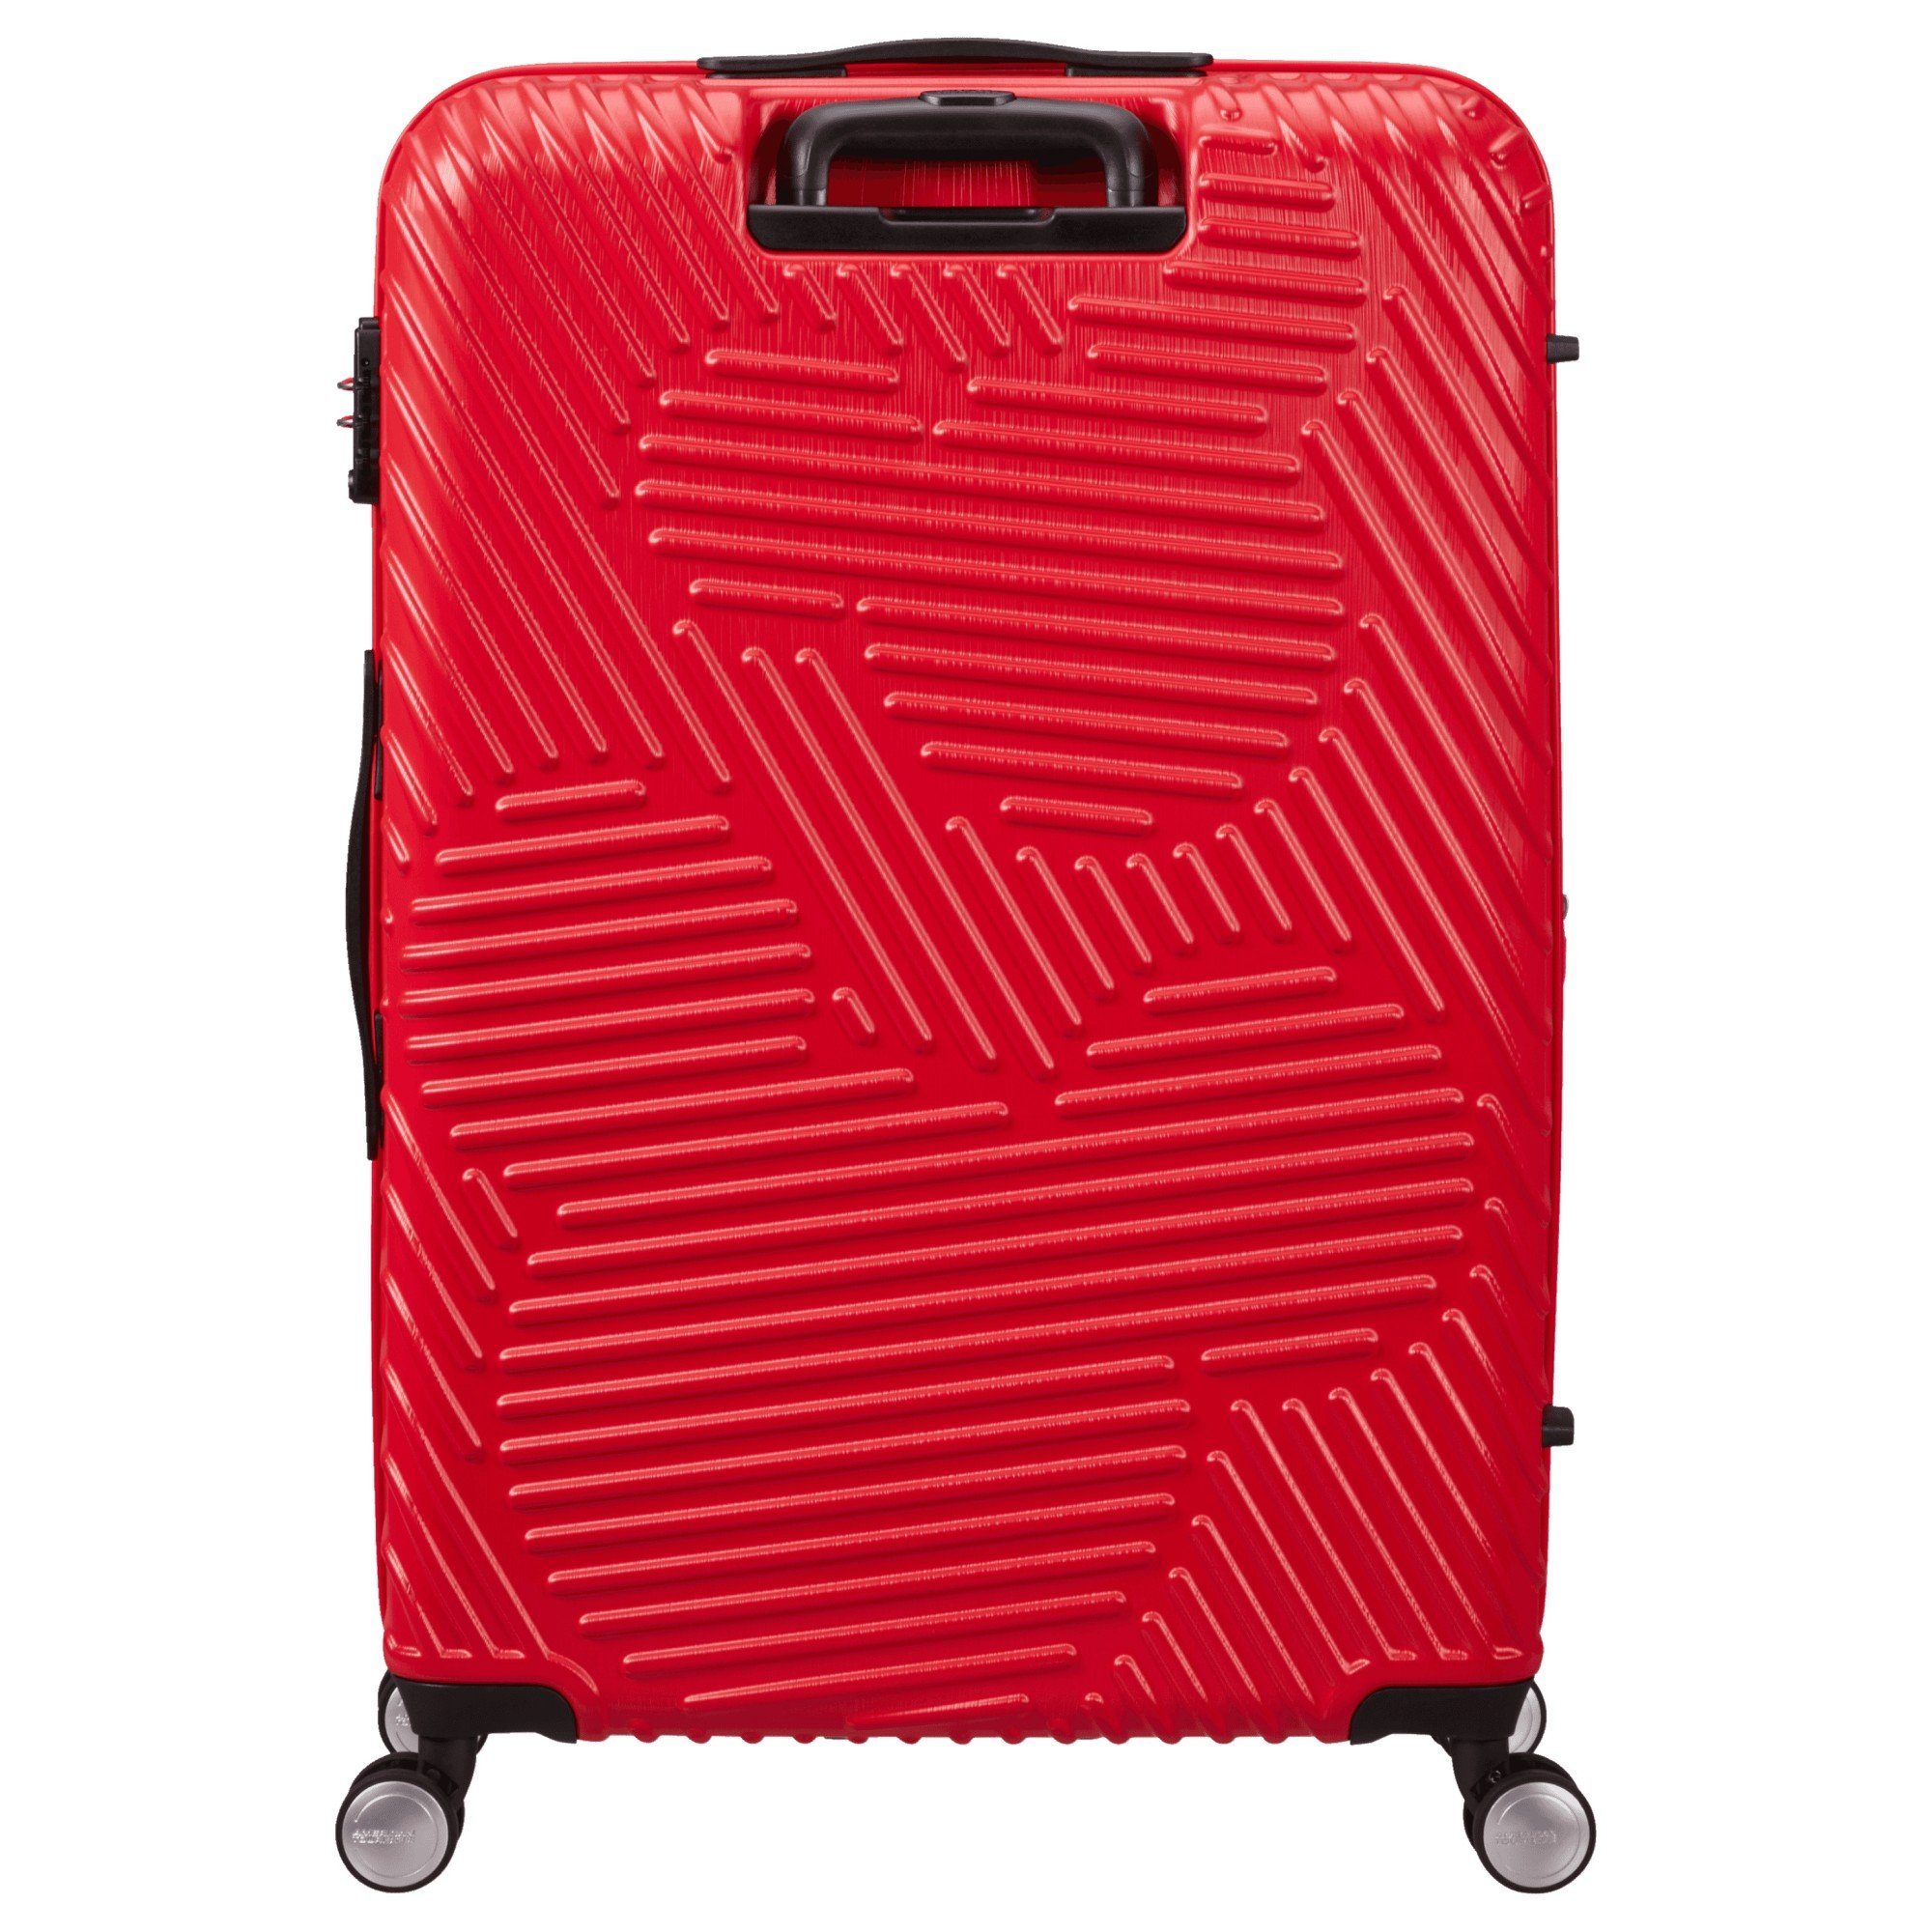 cm Mickey Trolley 76 Clouds erw., American Red Mickey Classic 4-Rollen-Trolley Tourister® 4 - Rollen